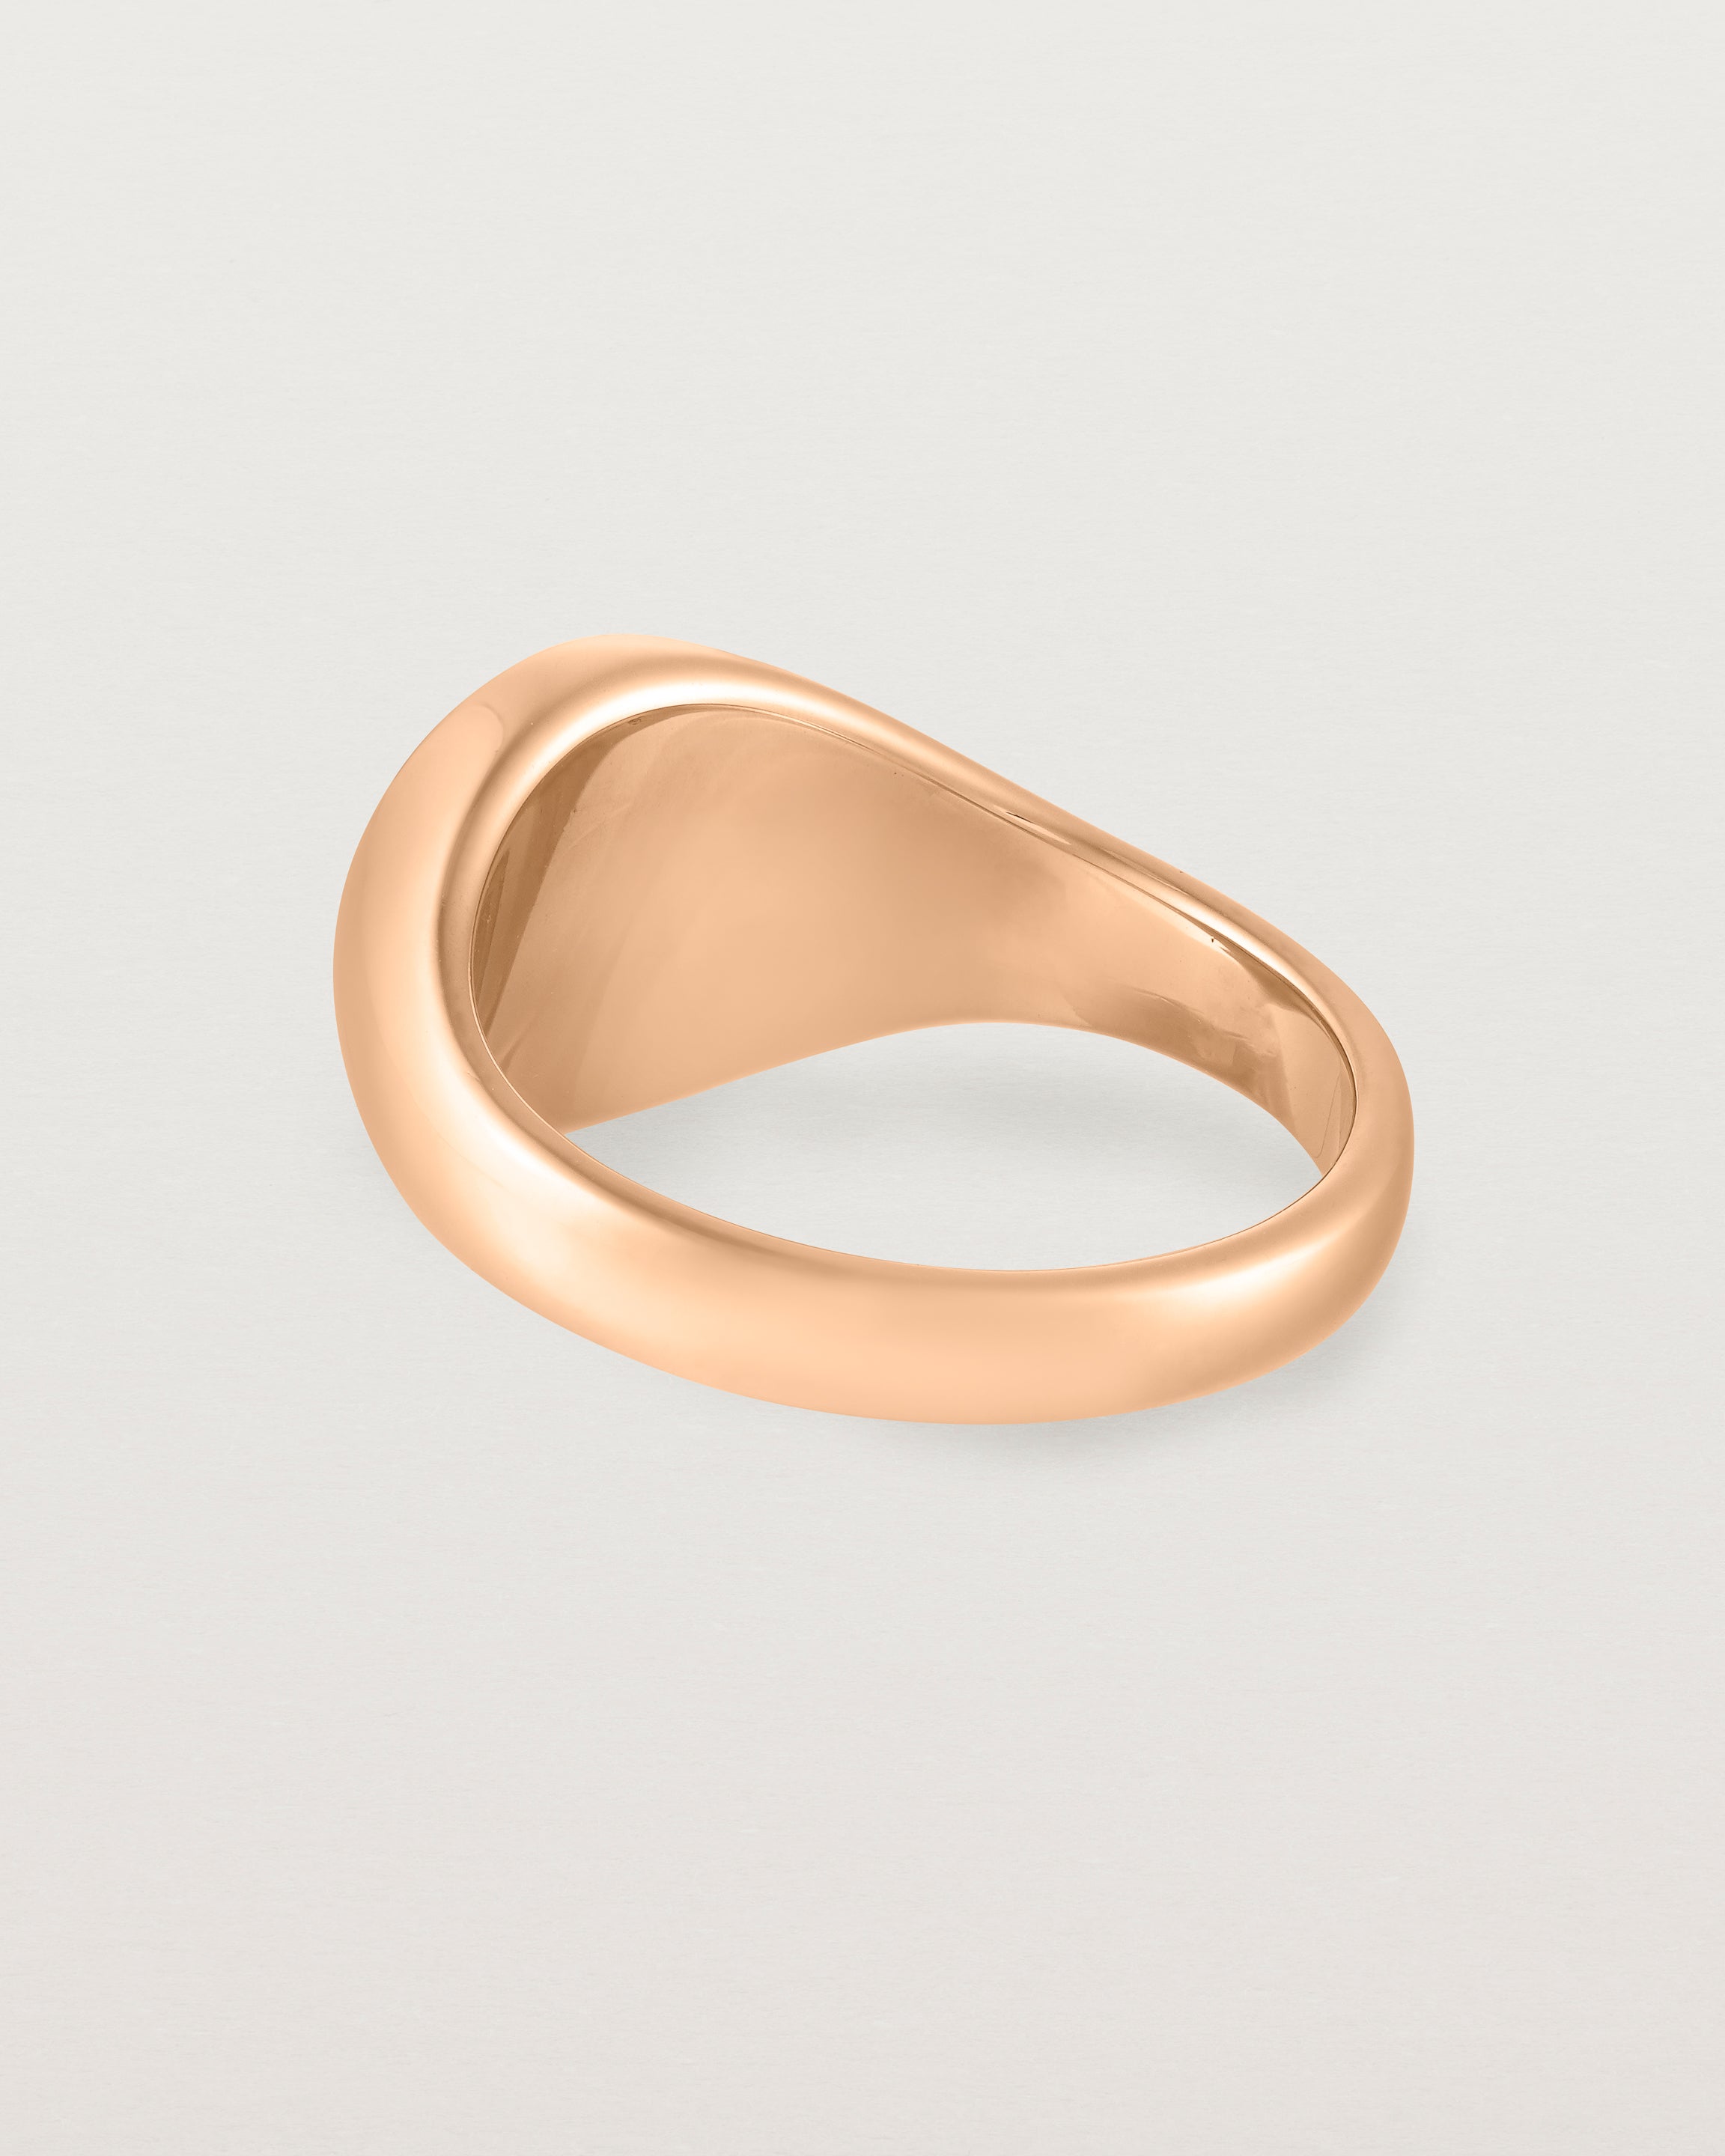 Back view of the Kian Signet Ring | Rose Gold.